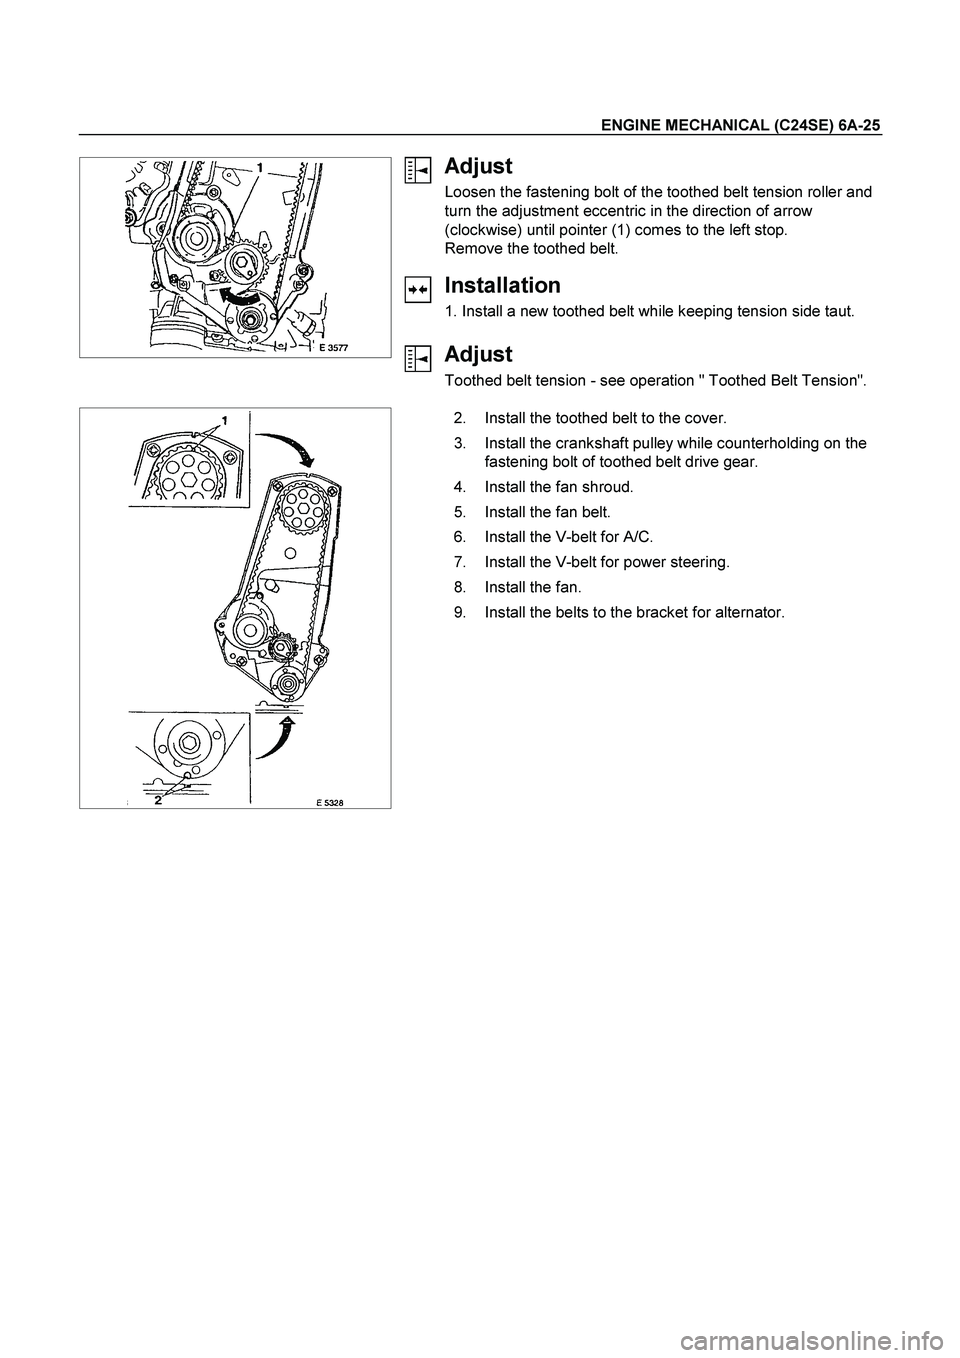 ISUZU TF SERIES 2004  Workshop Manual ENGINE MECHANICAL (C24SE) 6A-25 
 
   
 
 
 
 
 
 
Adjust 
Loosen the fastening bolt of the toothed belt tension roller and 
turn the adjustment eccentric in the direction of arrow 
(clockwise) until 